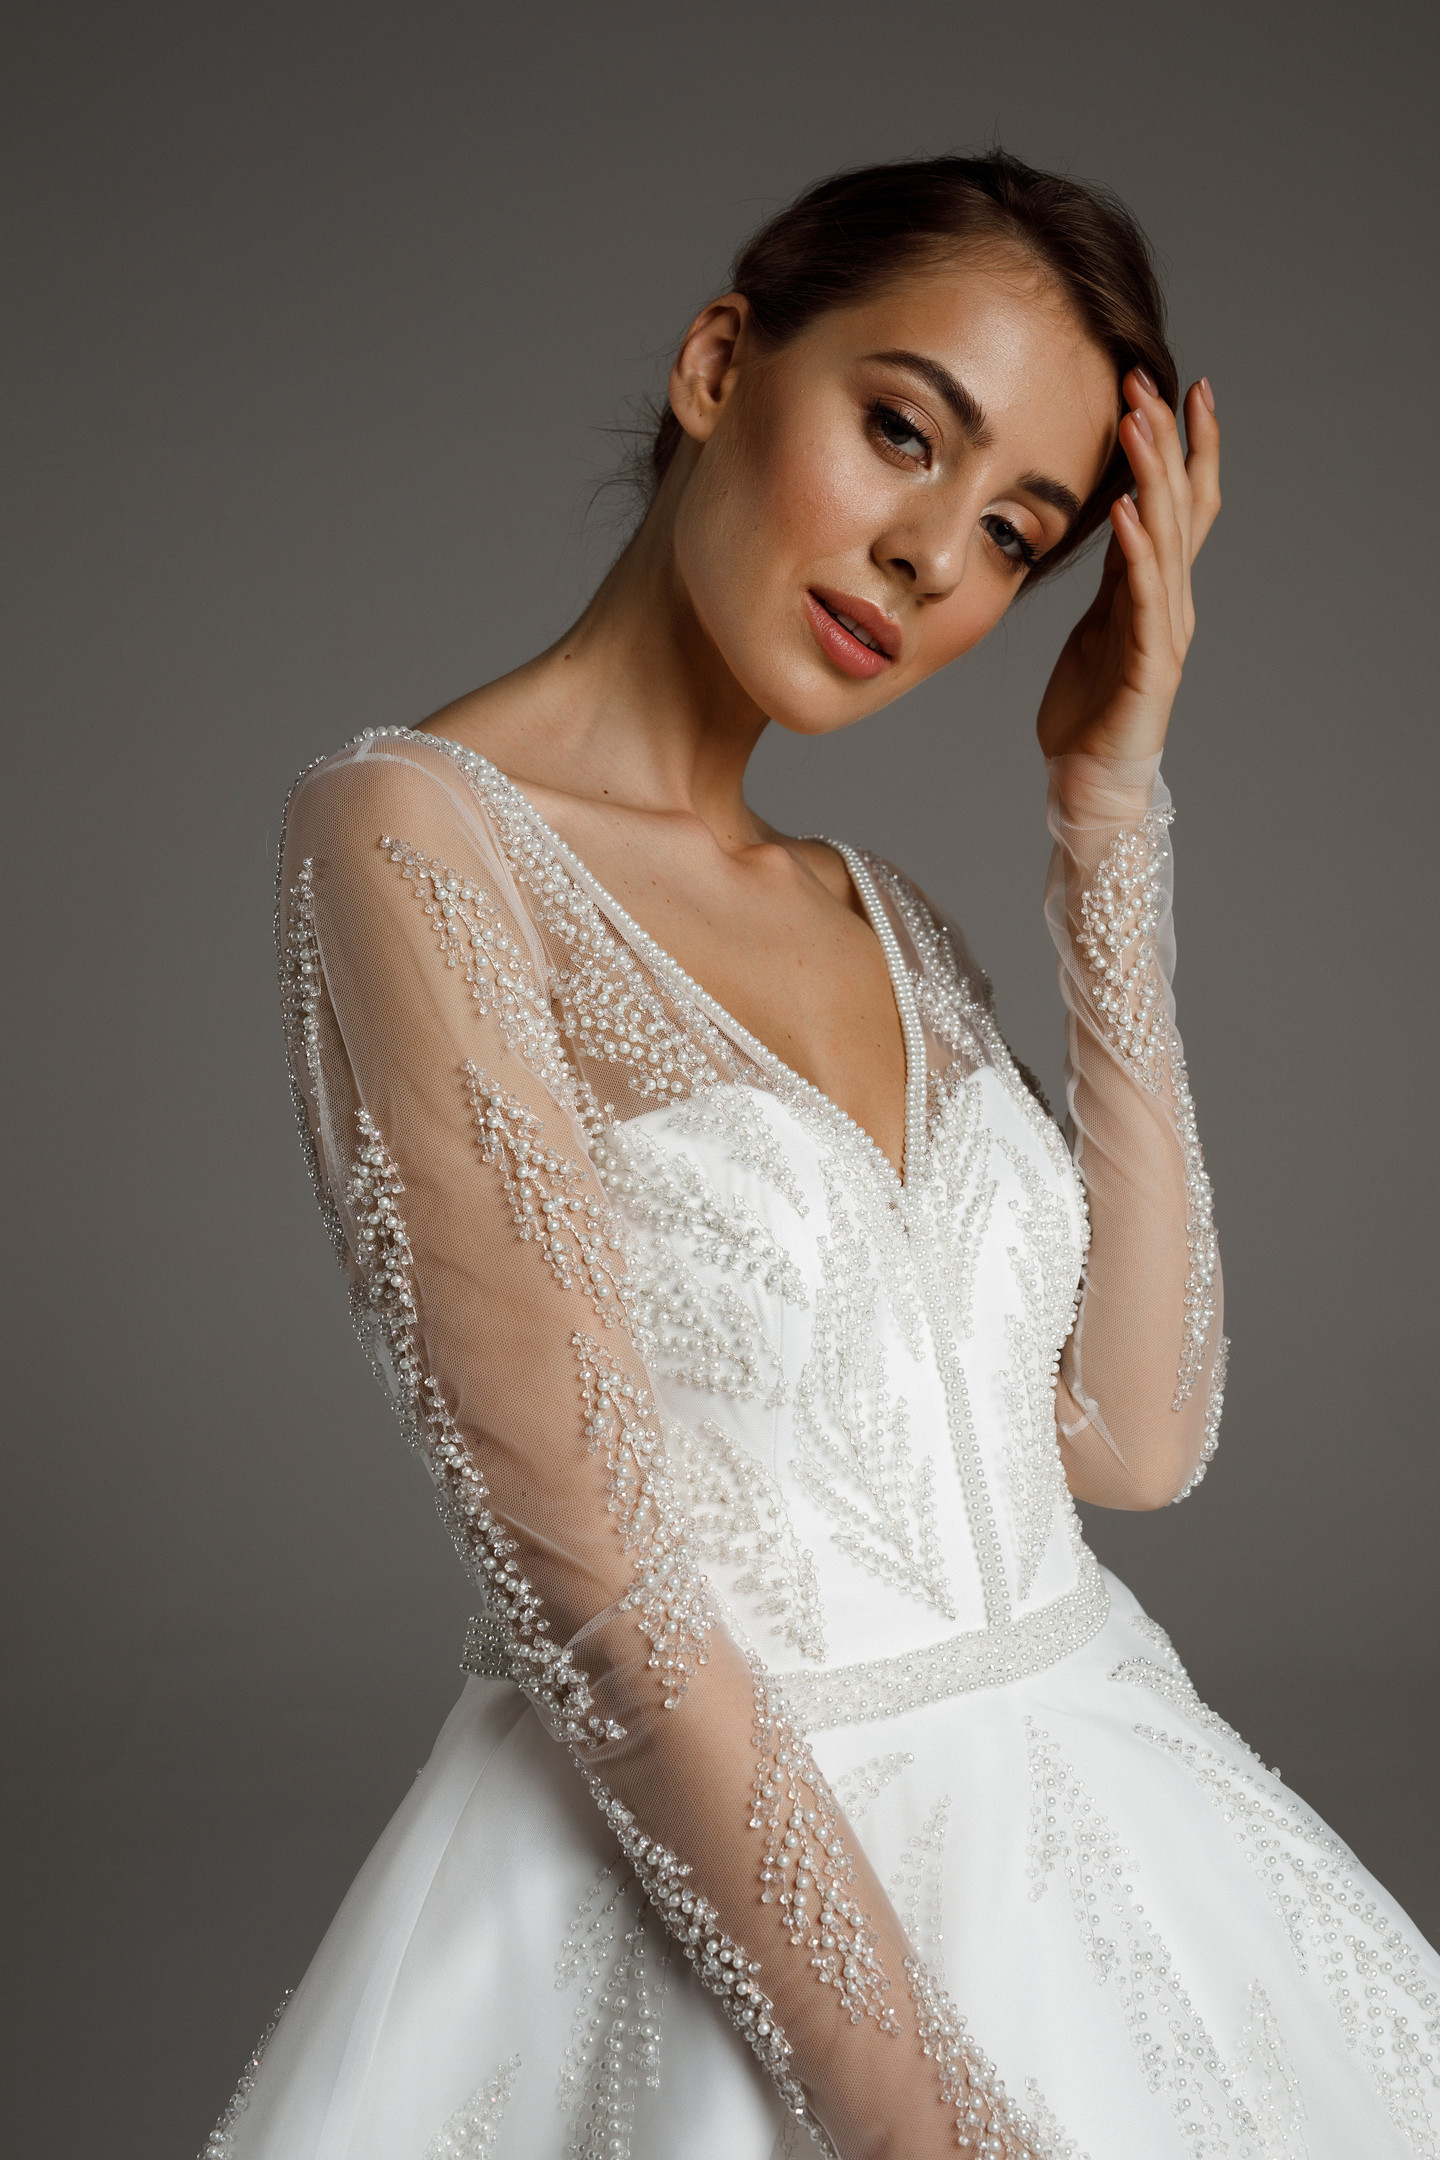 Juliana gown, 2020, couture, dress, bridal, off-white, satin, embroidery, sleeves, A-line, archive